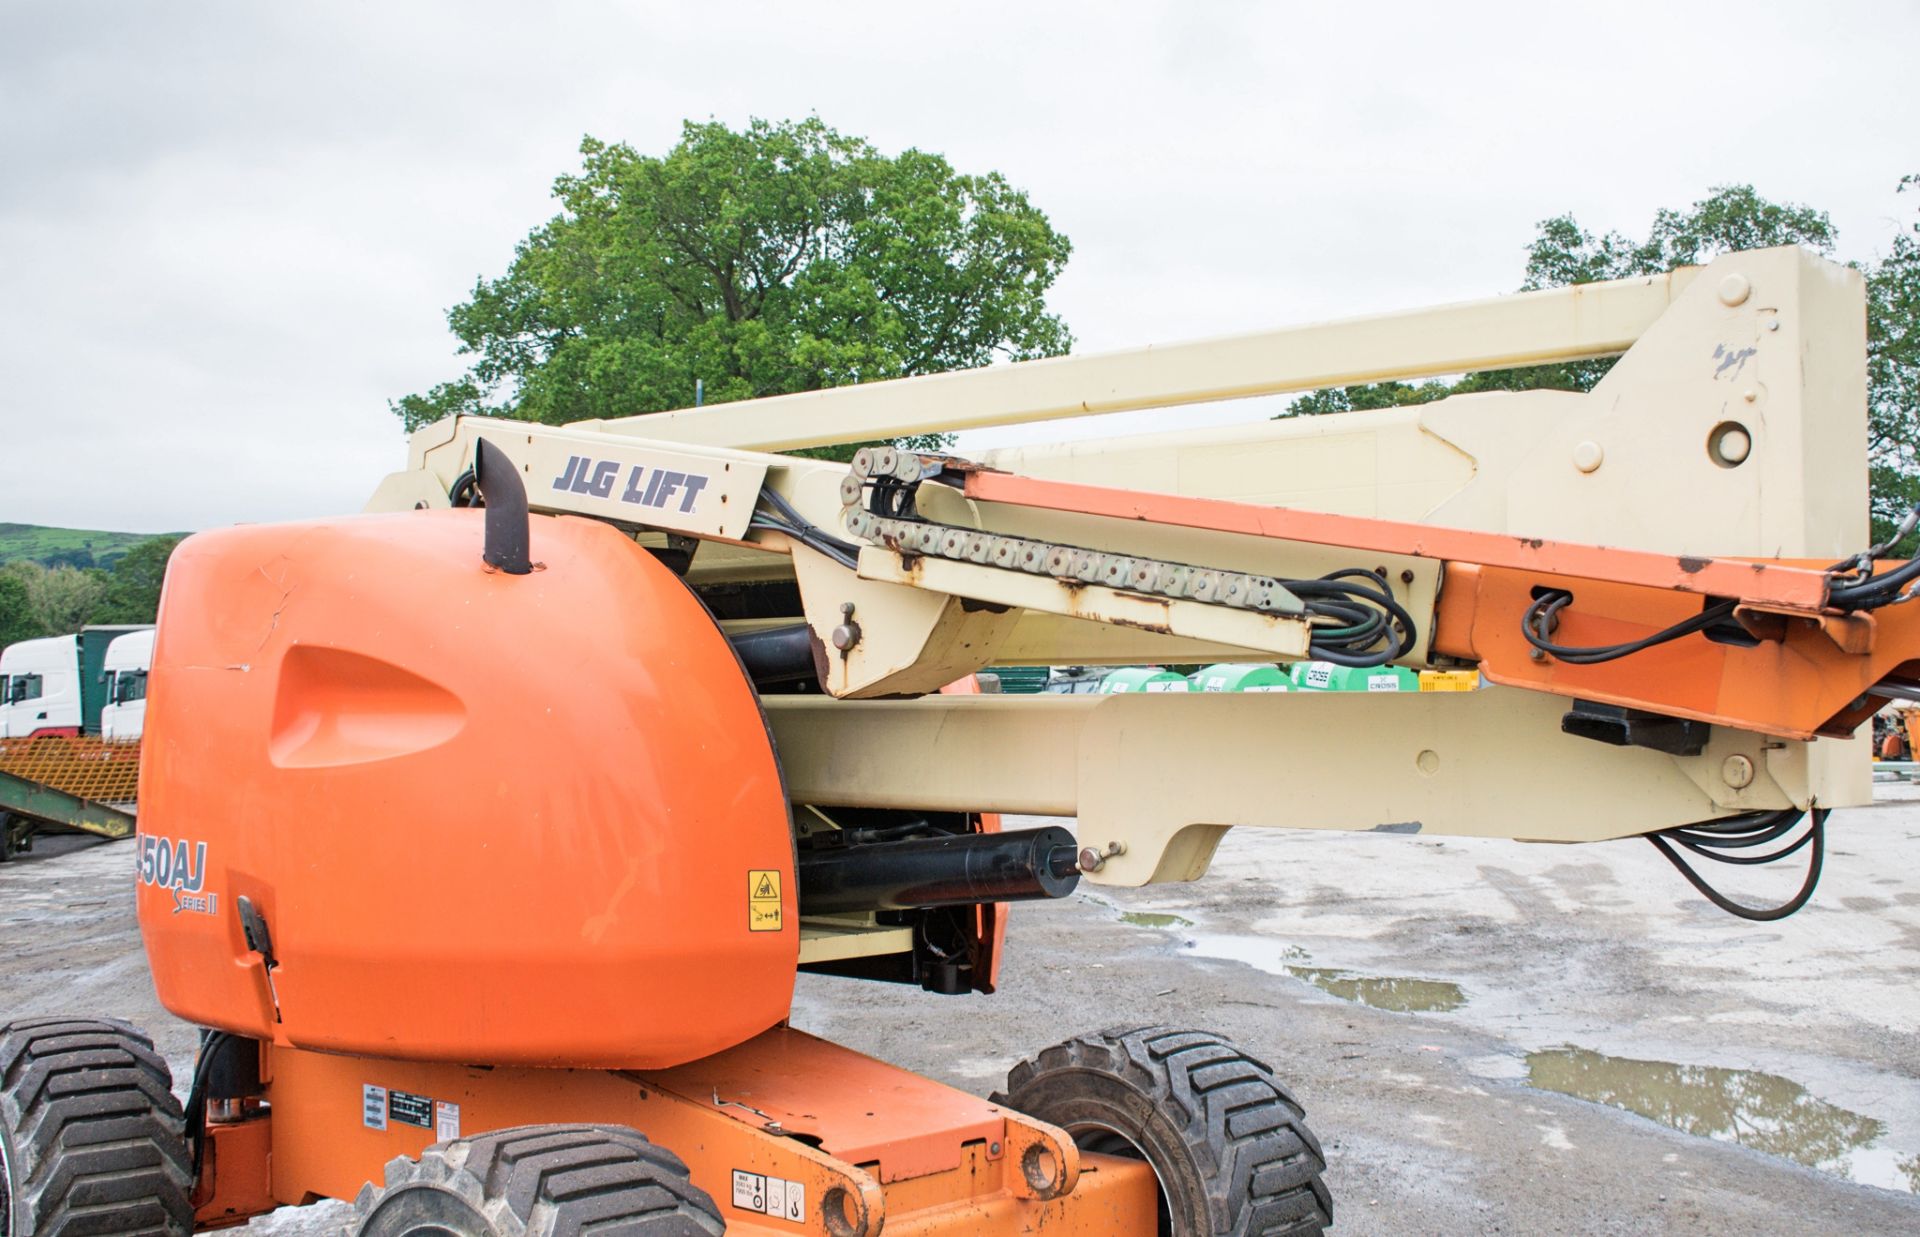 JLG 450AJ 45 ft diesel driven 4WD articulated boom lift Year: 2008 S/N: 5149 Recorded Hours: 2283 - Image 11 of 20